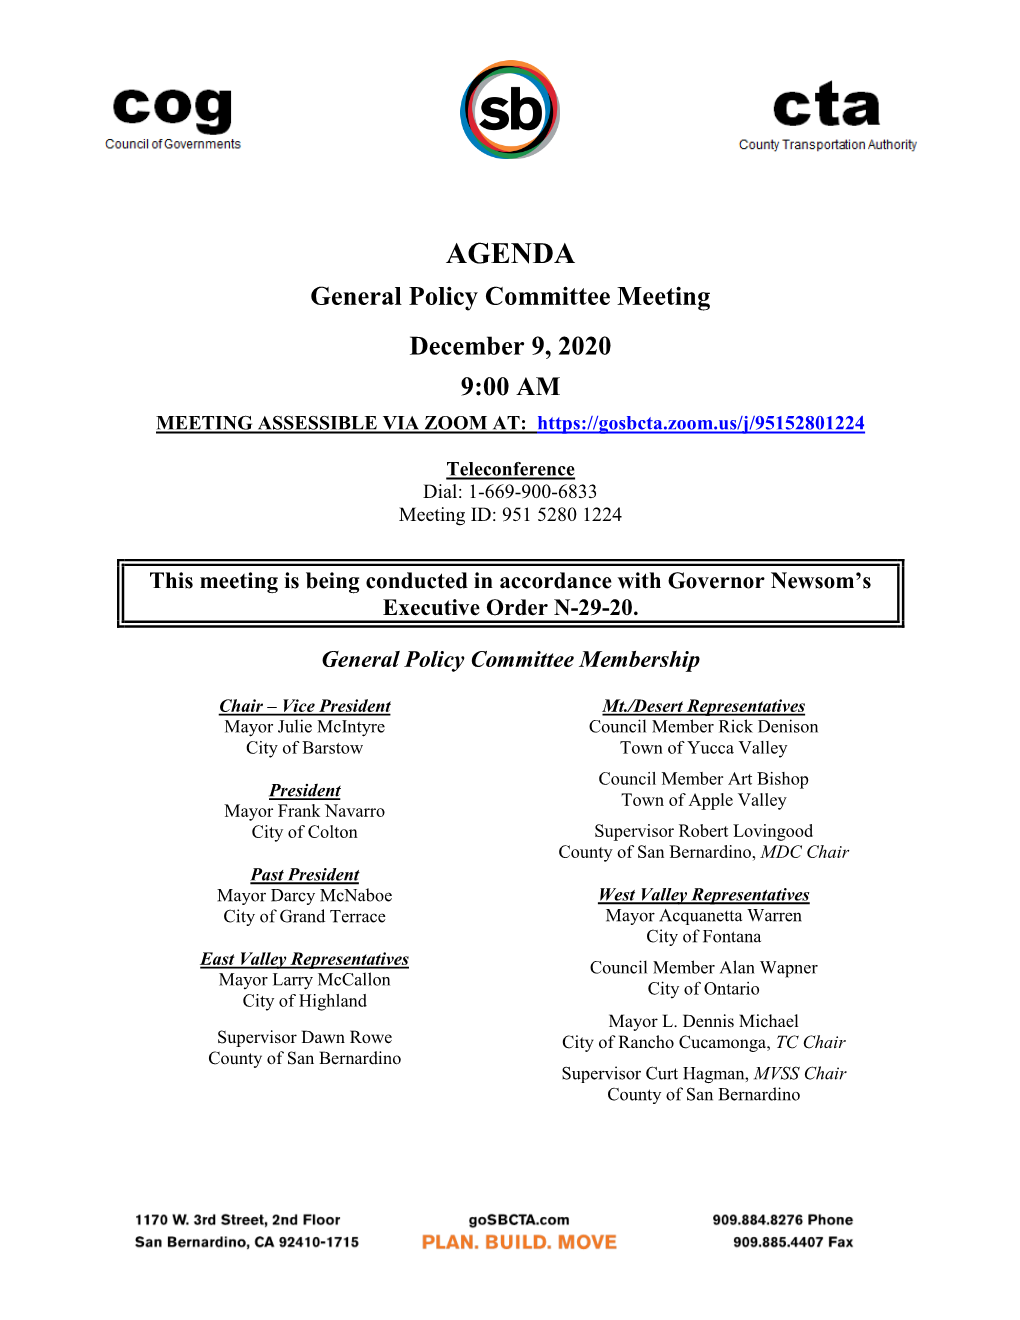 AGENDA General Policy Committee Meeting December 9, 2020 9:00 AM MEETING ASSESSIBLE VIA ZOOM AT